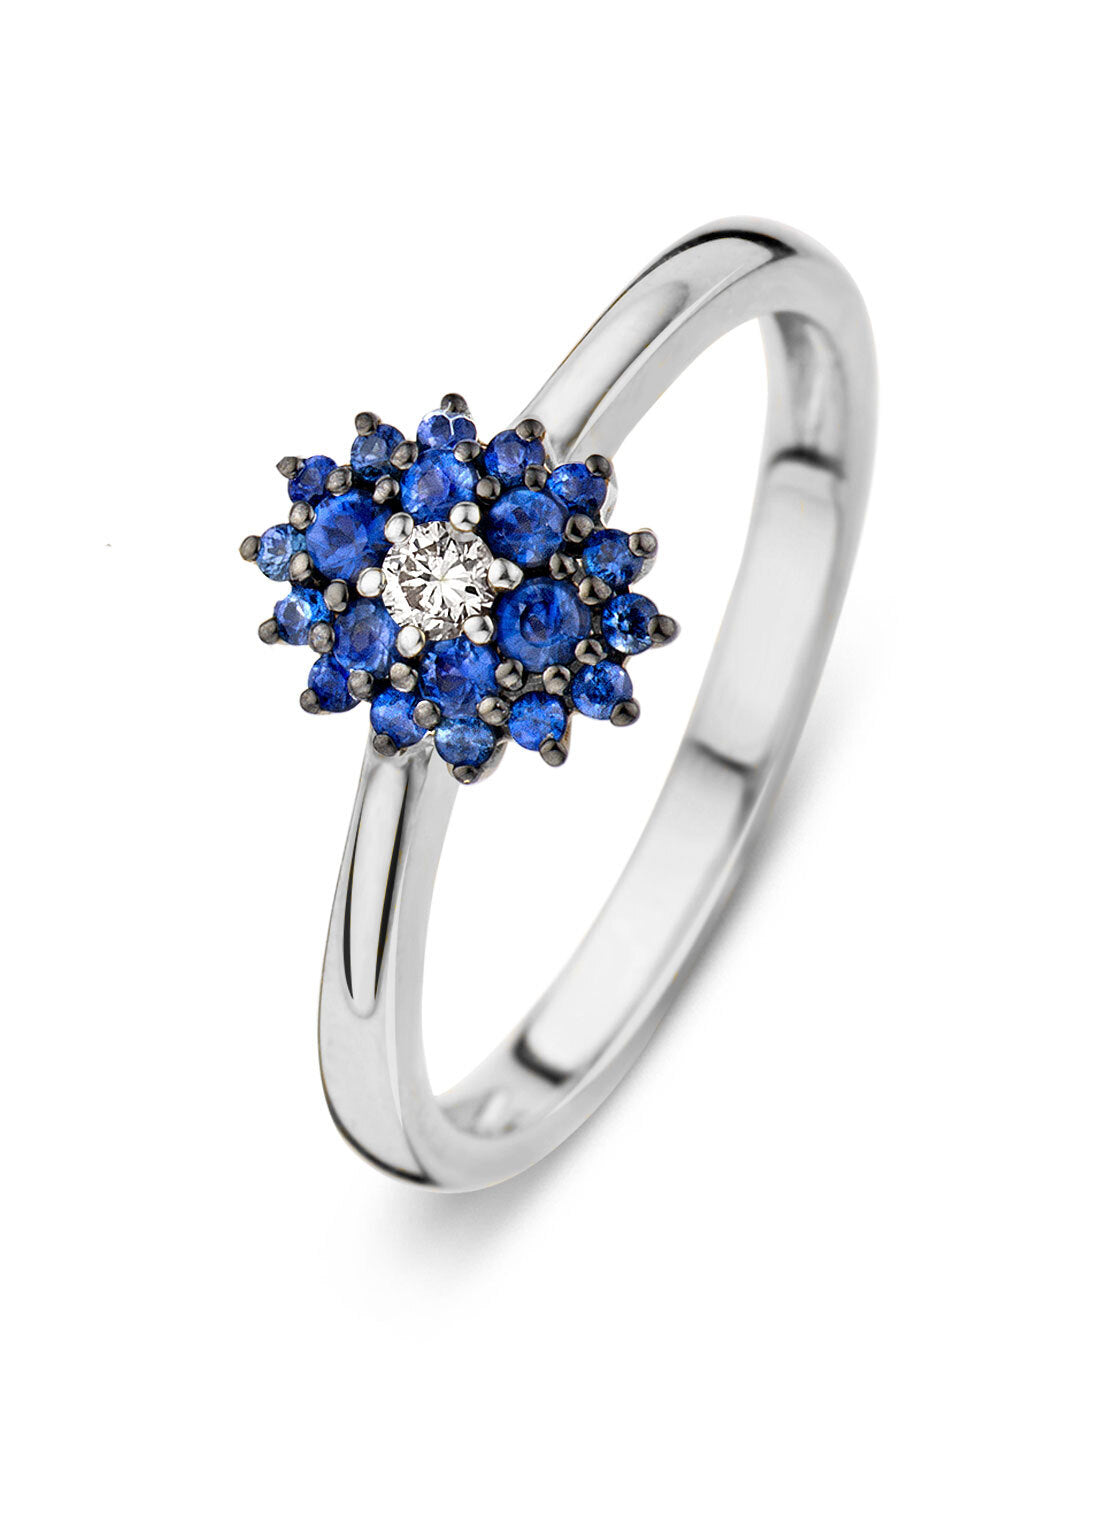 White gold ring, 0.29 CT Blue Sapphire, Majestic